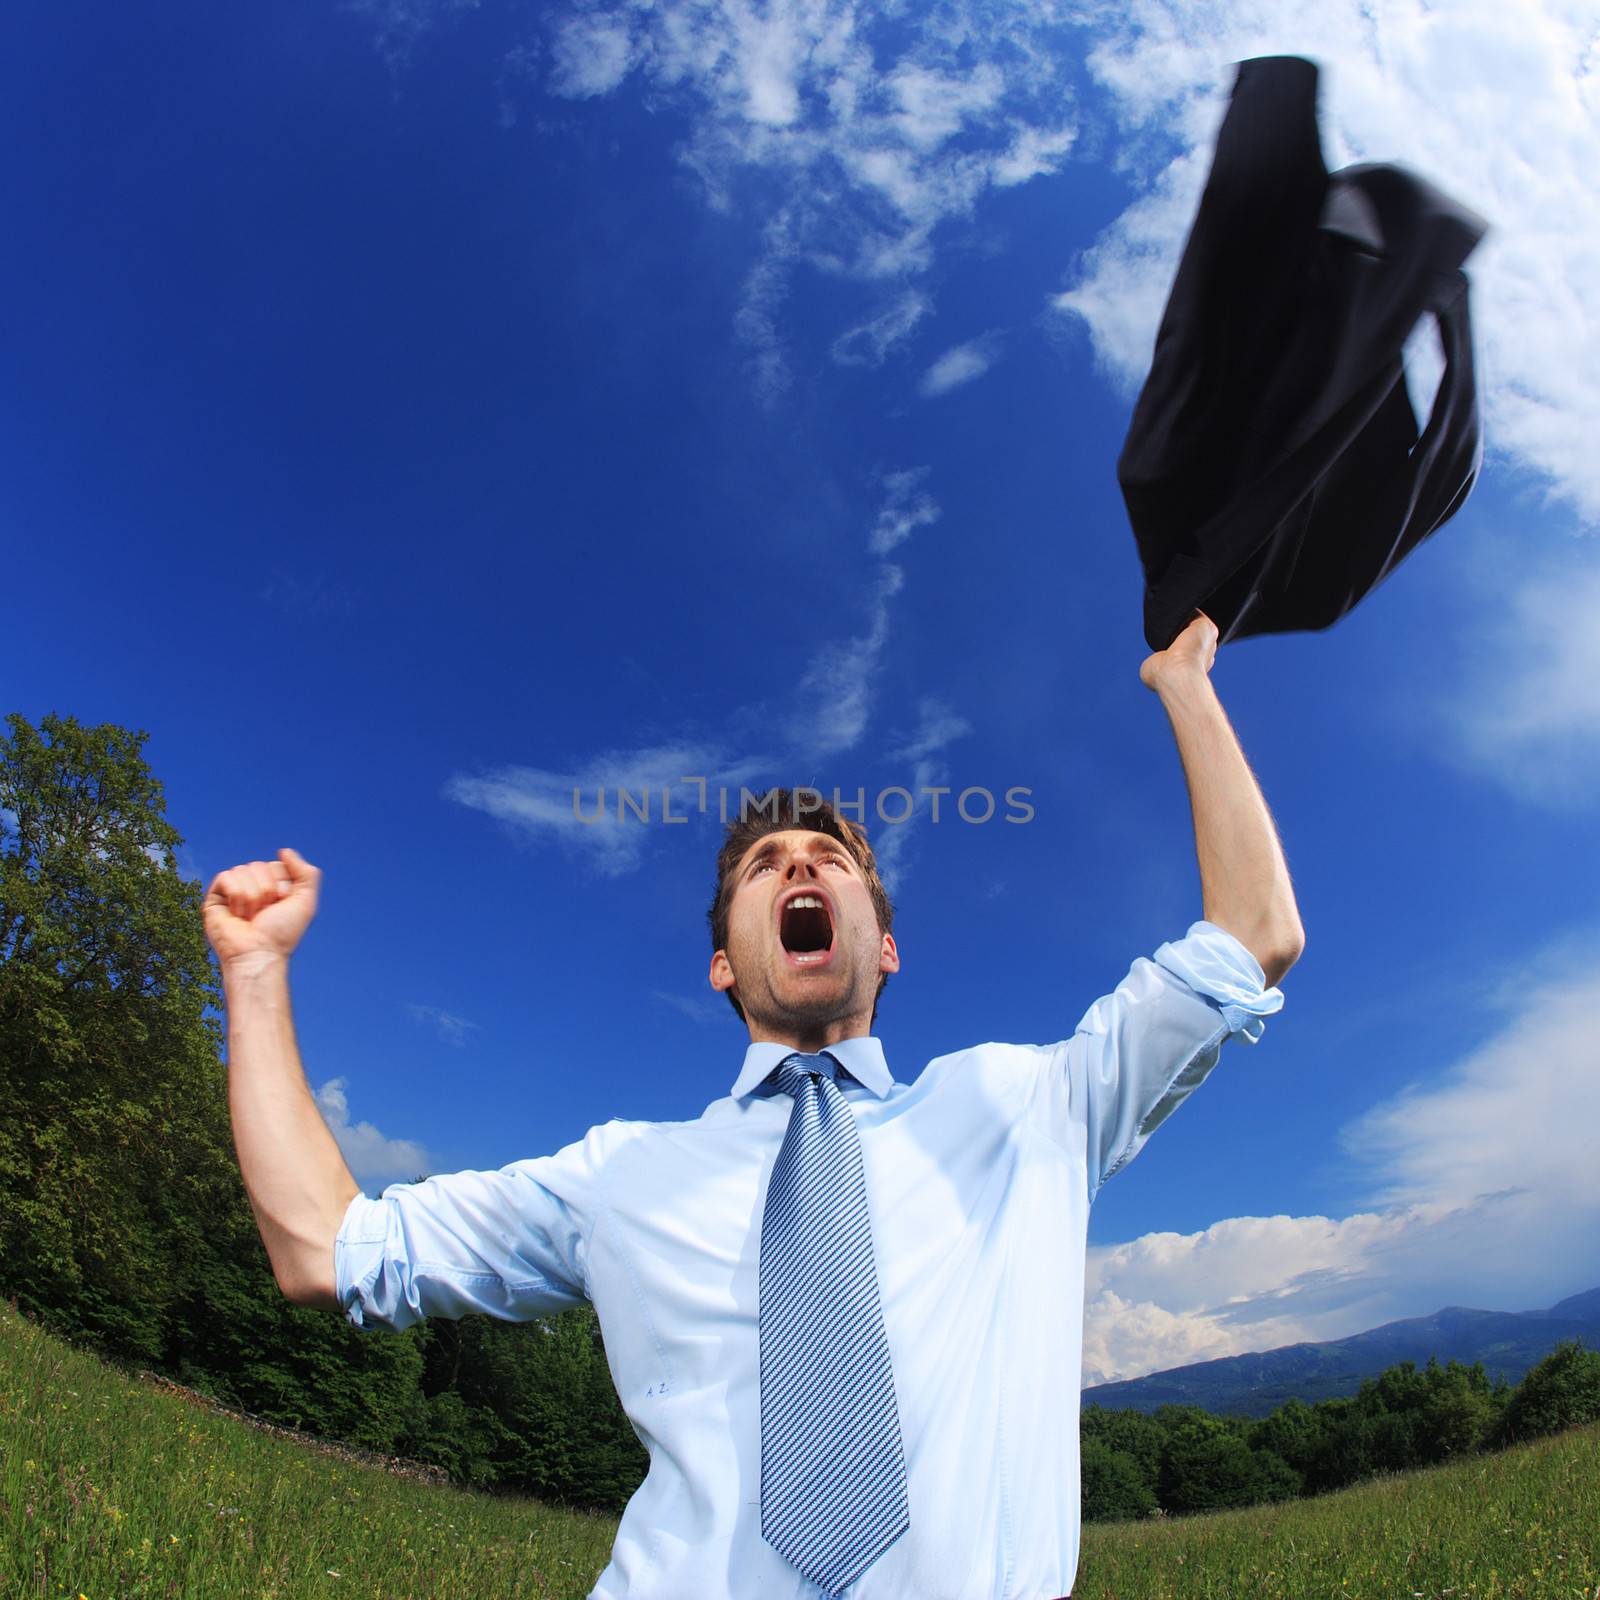 Young business man celebrating his success with arms raised. Fisheye lens used